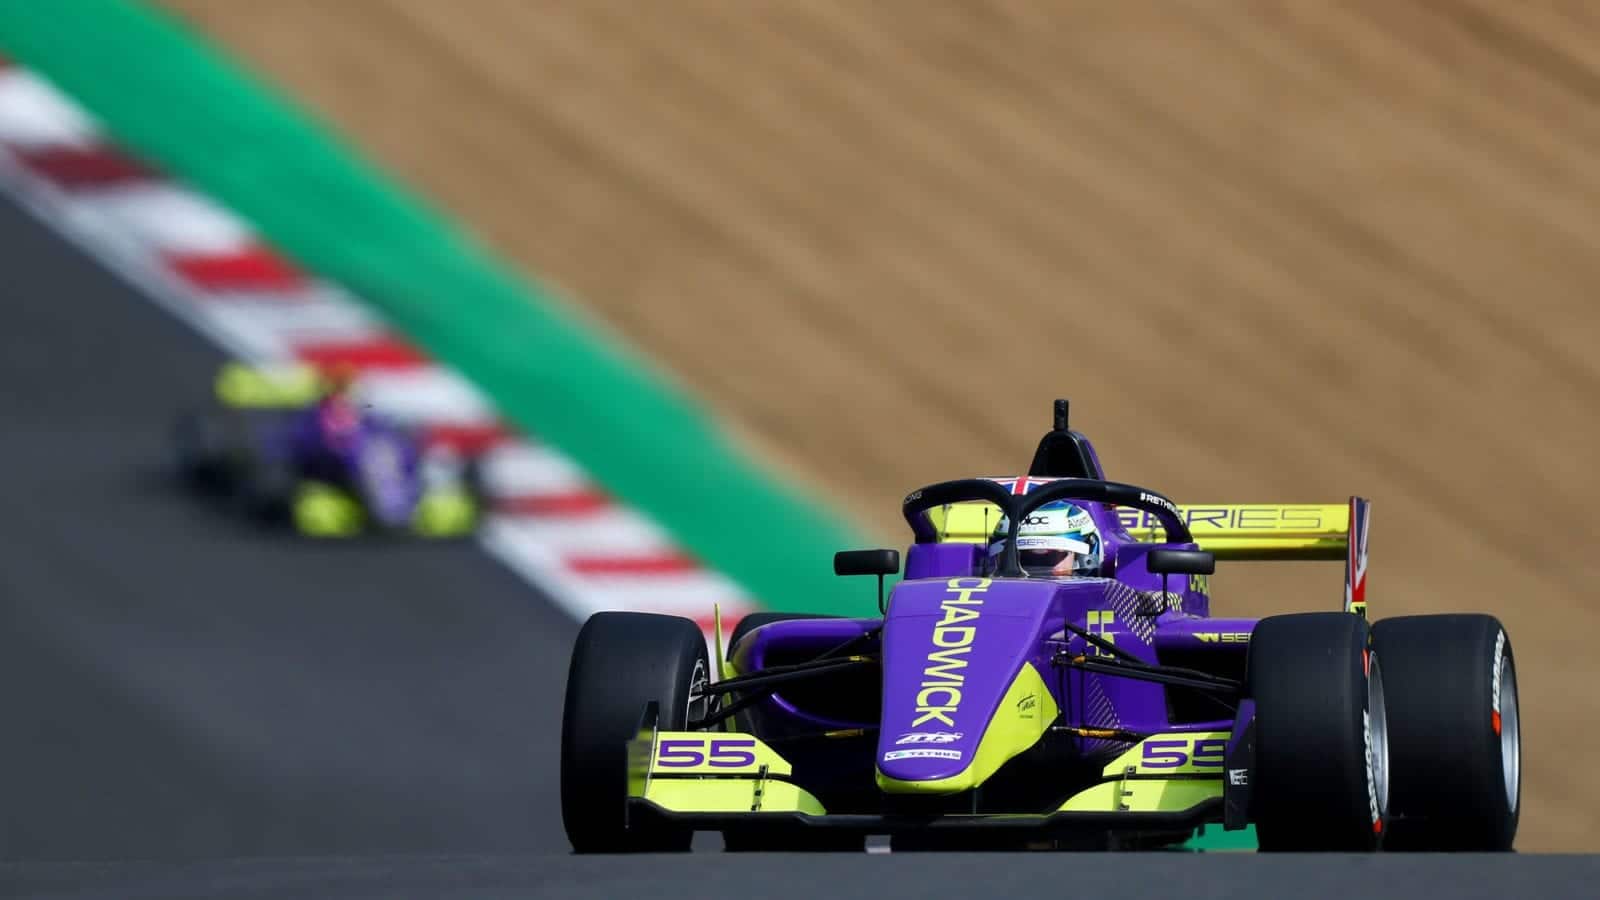 LONGFIELD, ENGLAND - AUGUST 11: Jamie Chadwick of Great Britain drives her a Tatuus F3 T-318 during qualifying for the W Series round six and final race of the inaugural championship at Brands Hatch on August 11, 2019 in Longfield, England. (Photo by Dan Istitene/Getty Images)